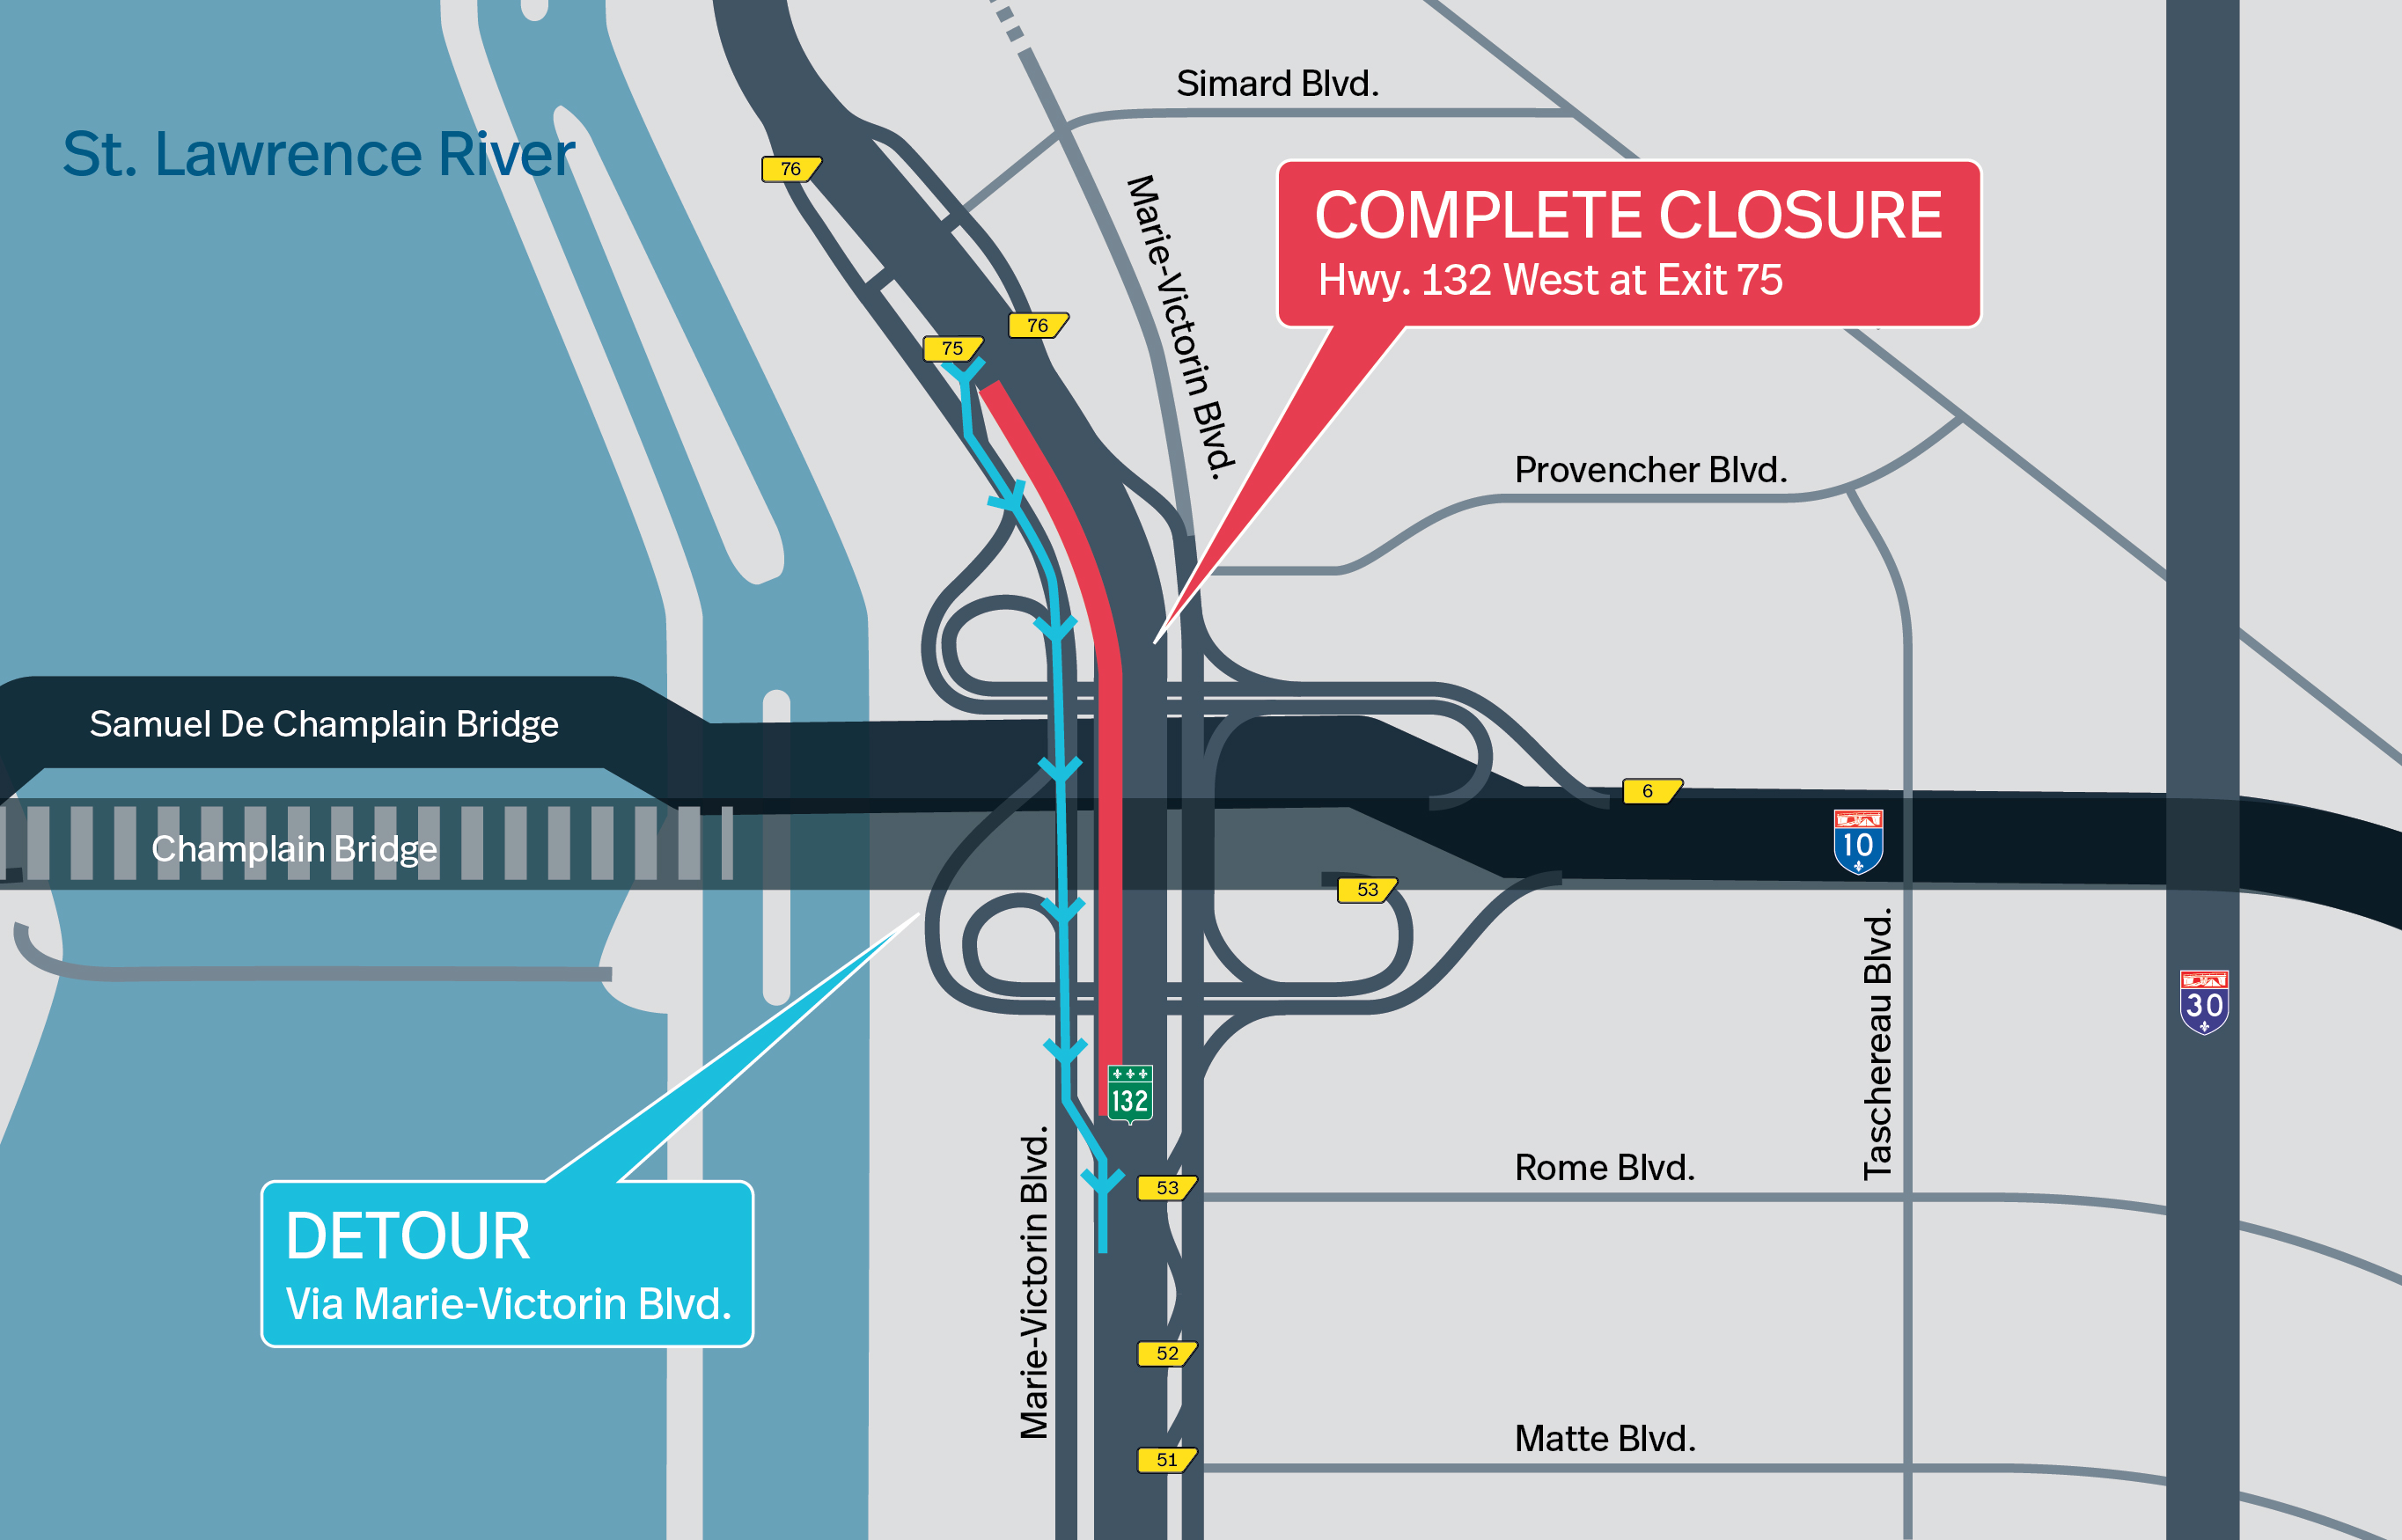 Brossard Sector | Complete closure of Hwy. 132 West, under the original Champlain Bridge, on January 12